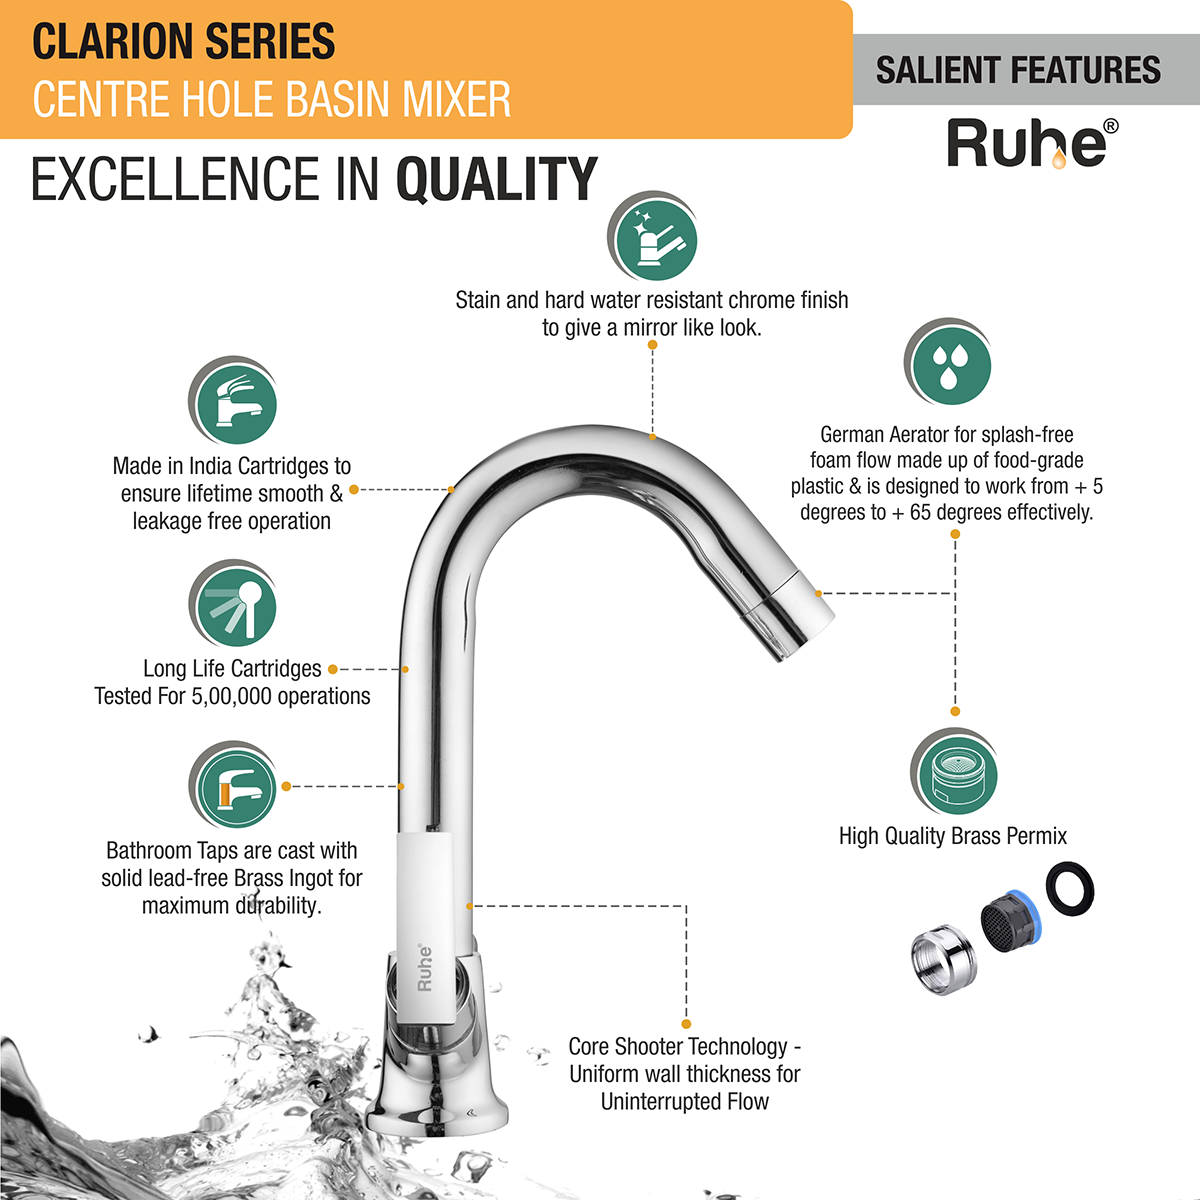 Clarion Centre Hole Basin Mixer with Small (12 inches) Round Swivel Spout Faucet features